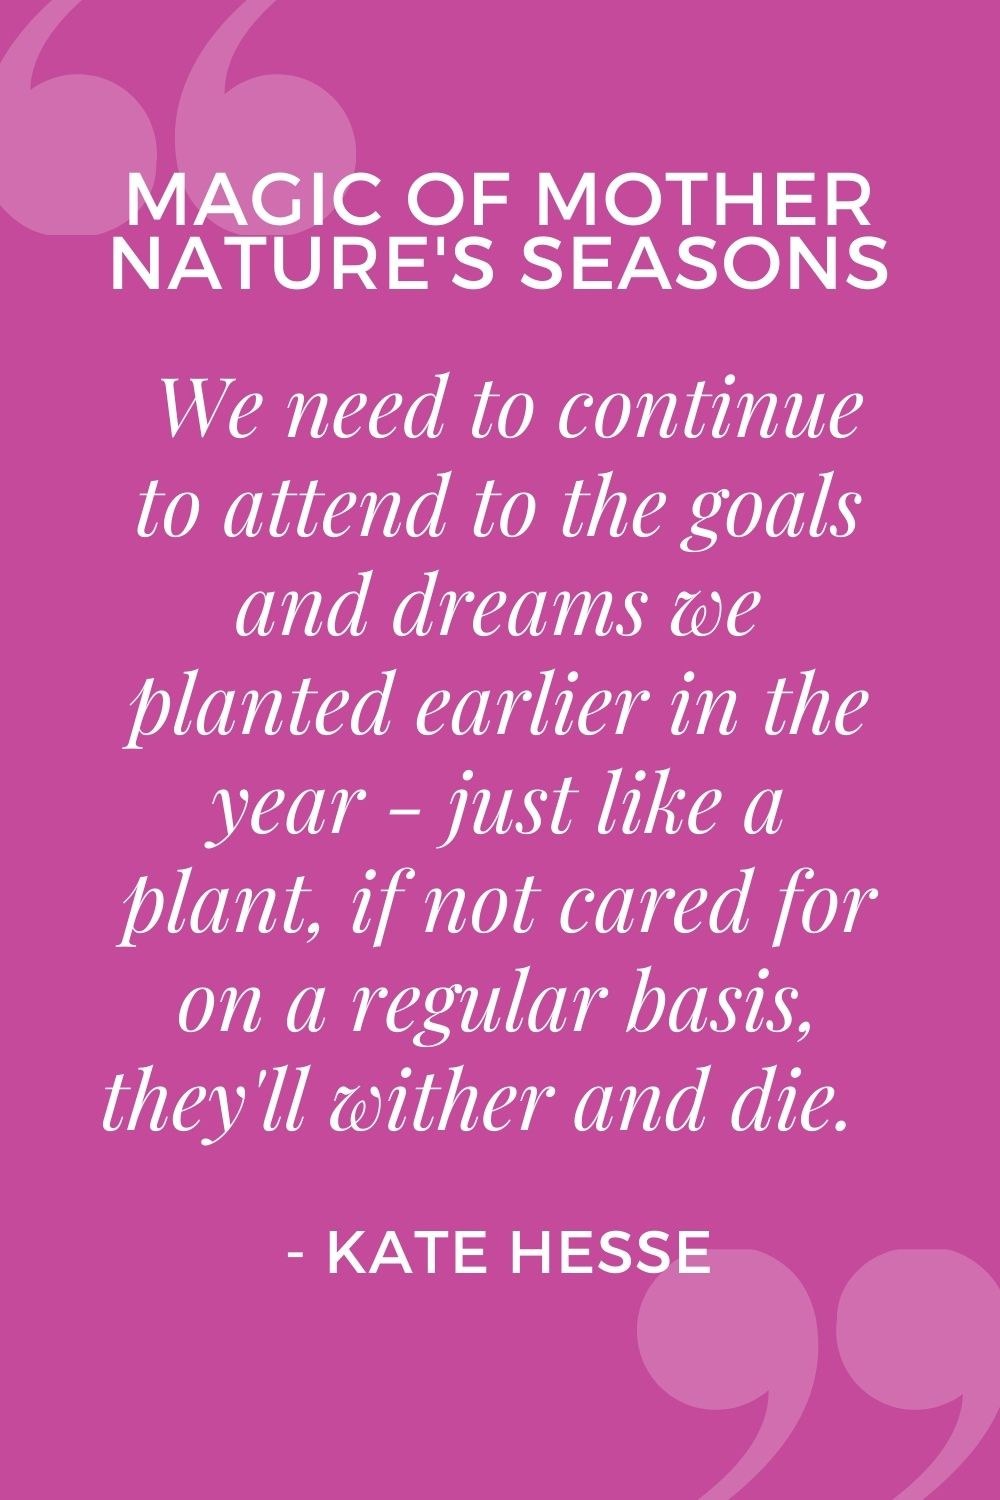 We need to continue to attend to the goals and dreams we planted earlier in the year - just like a plant, if not cared for on a regular basis, they'll wither and die.